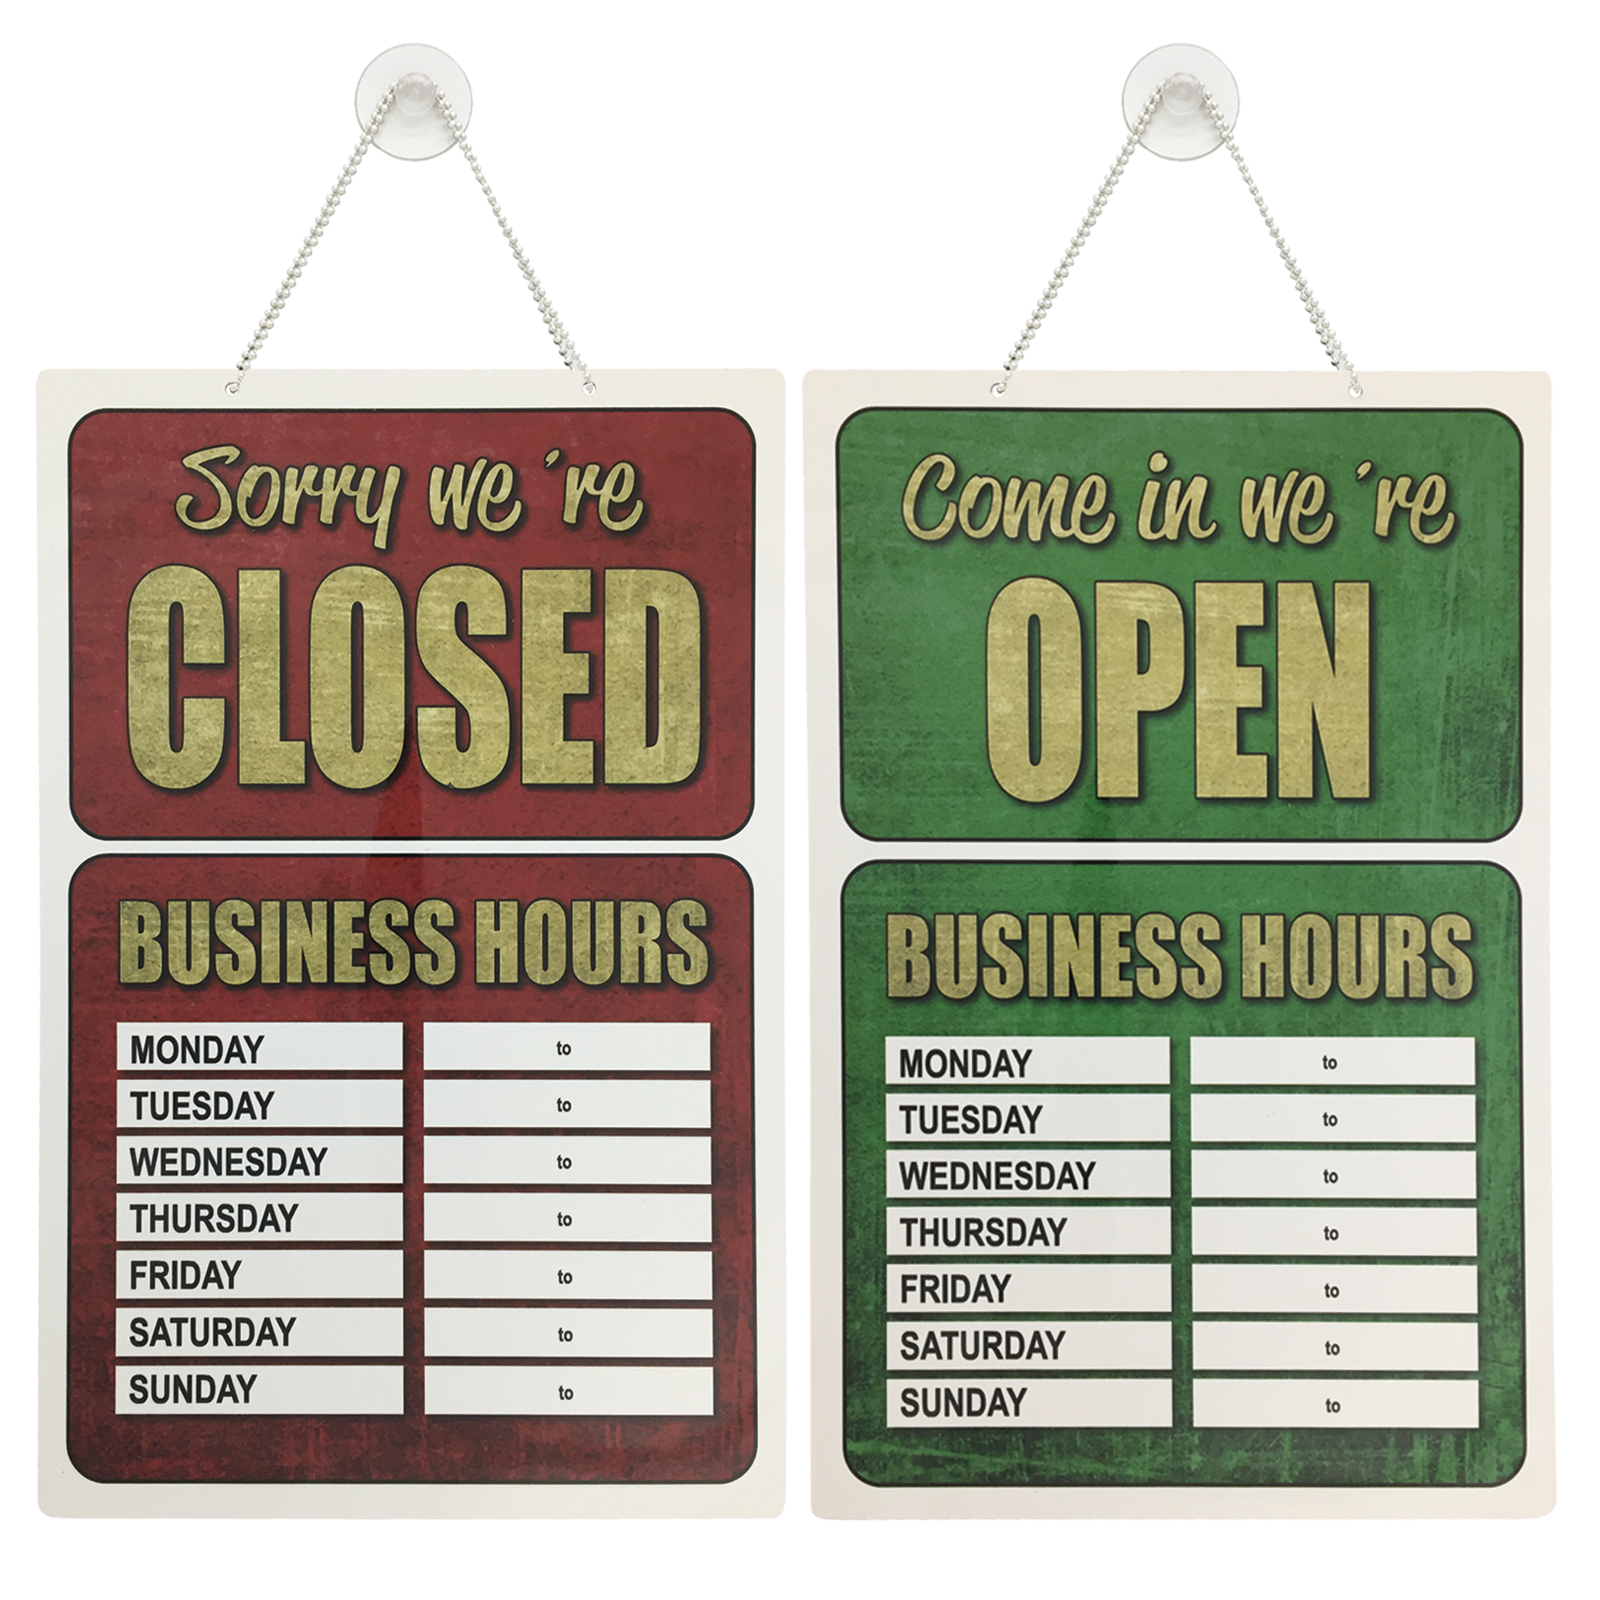 Open Signs for Business Double Sided Open Closed Sign Business Hours Sign Hanging Business Open Sign with Rope Hours of Operation Sign for Business Walls Window Shop Bar Hotel 11x6.1 inch 